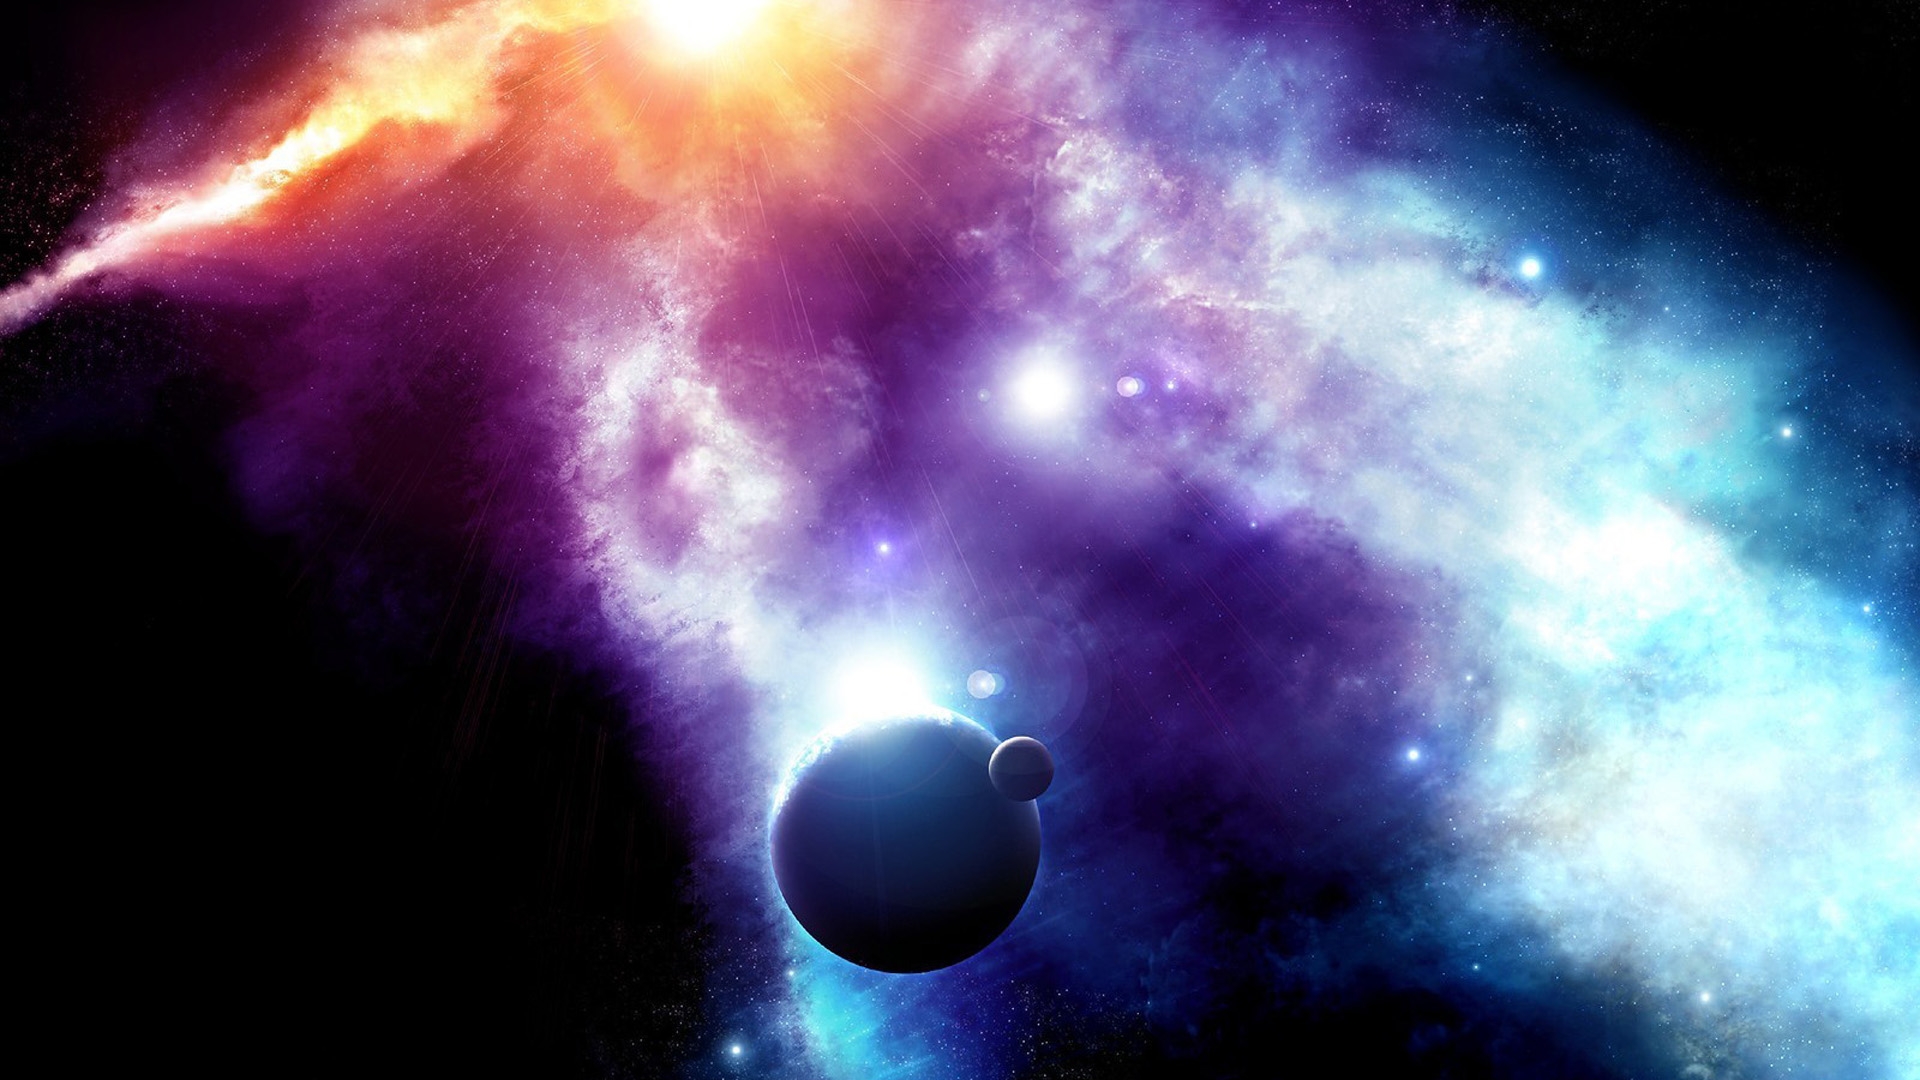 Epic Space Wallpapers Full HD : Abstract Wallpaper - Kokean.com